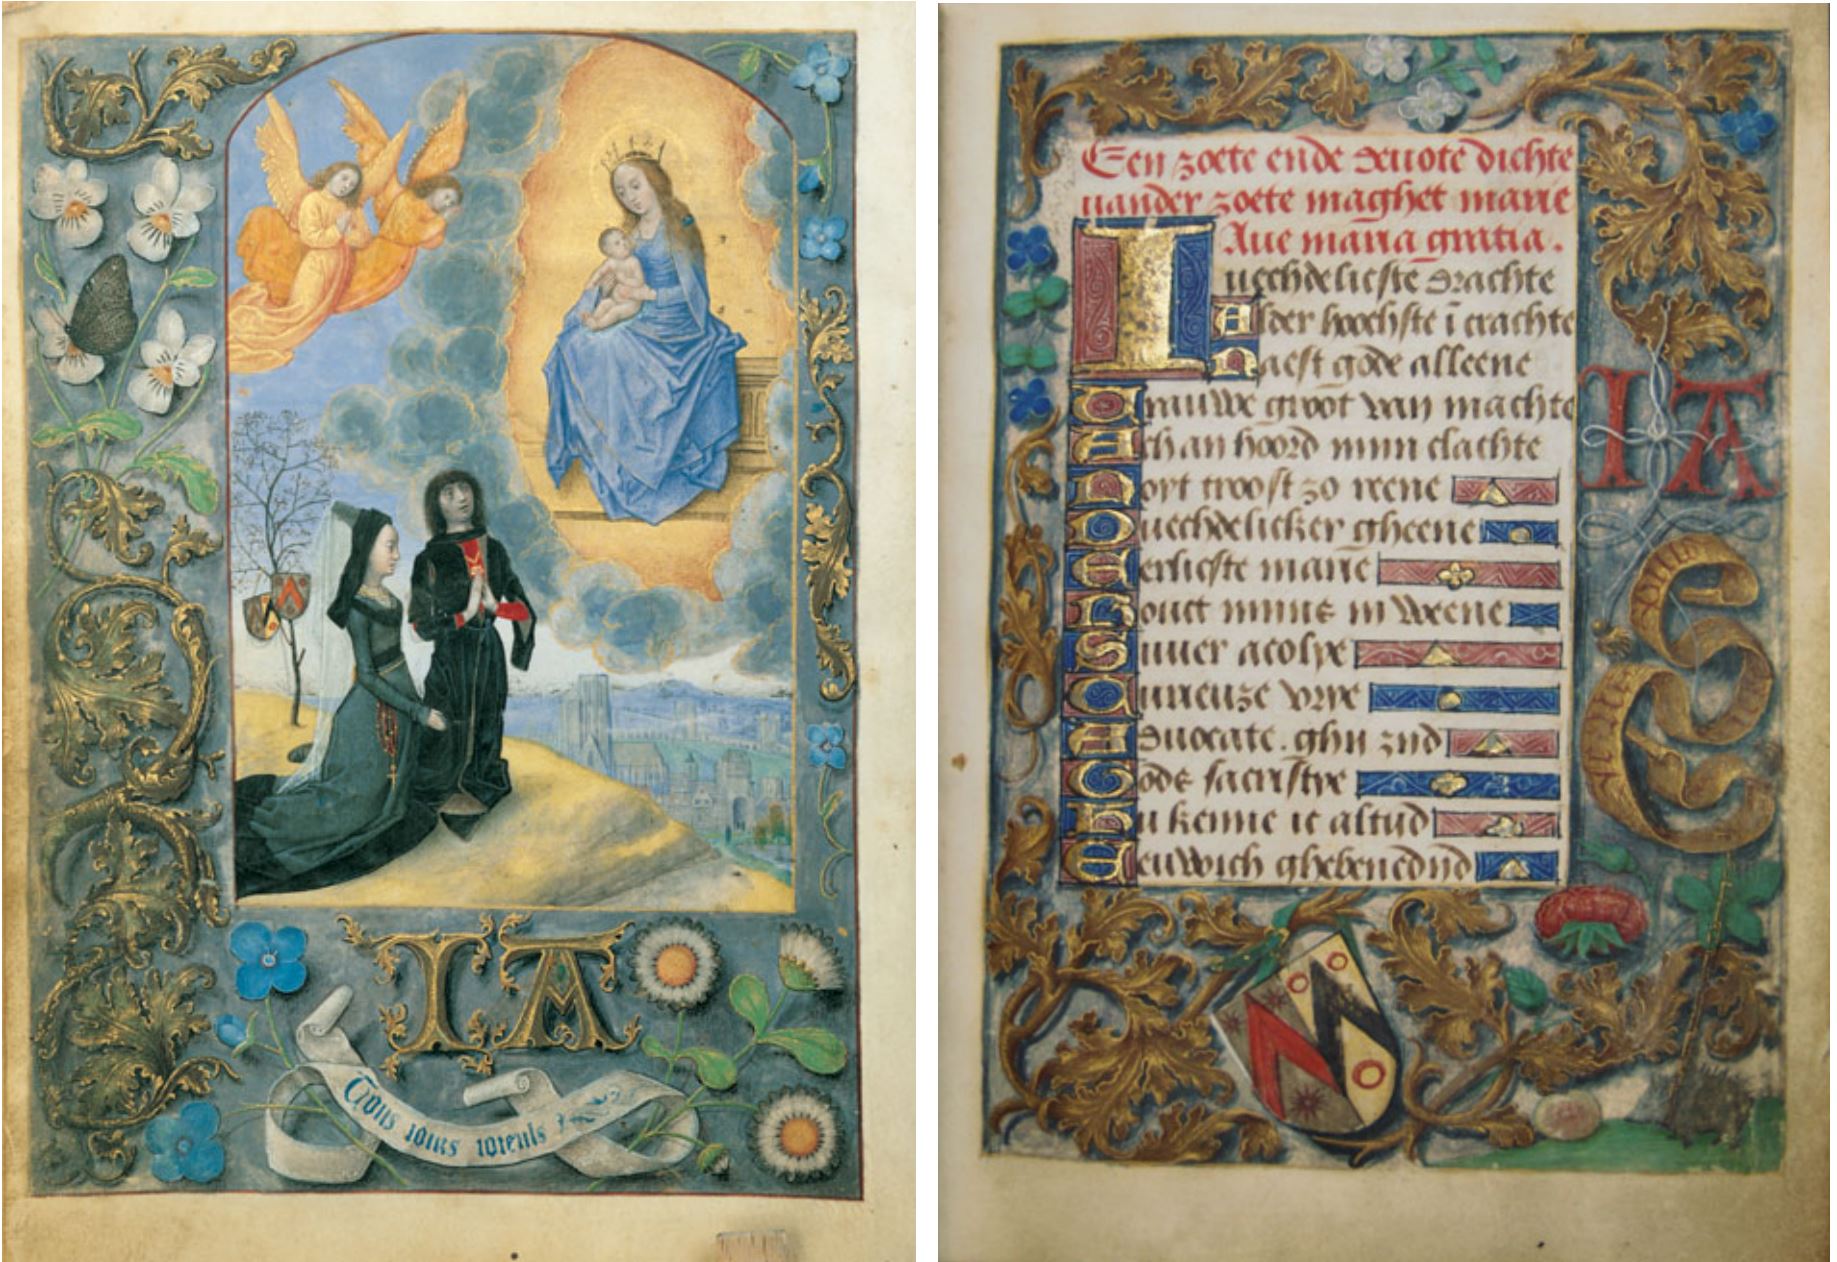 Master of the Dresden Prayer The receiver-general of Flanders Jan van der Scaghe and Anne de Memere Book of Hours Premonstratensian Abbey of Nove Ríse Ms. 10, fol. 16v fol 17